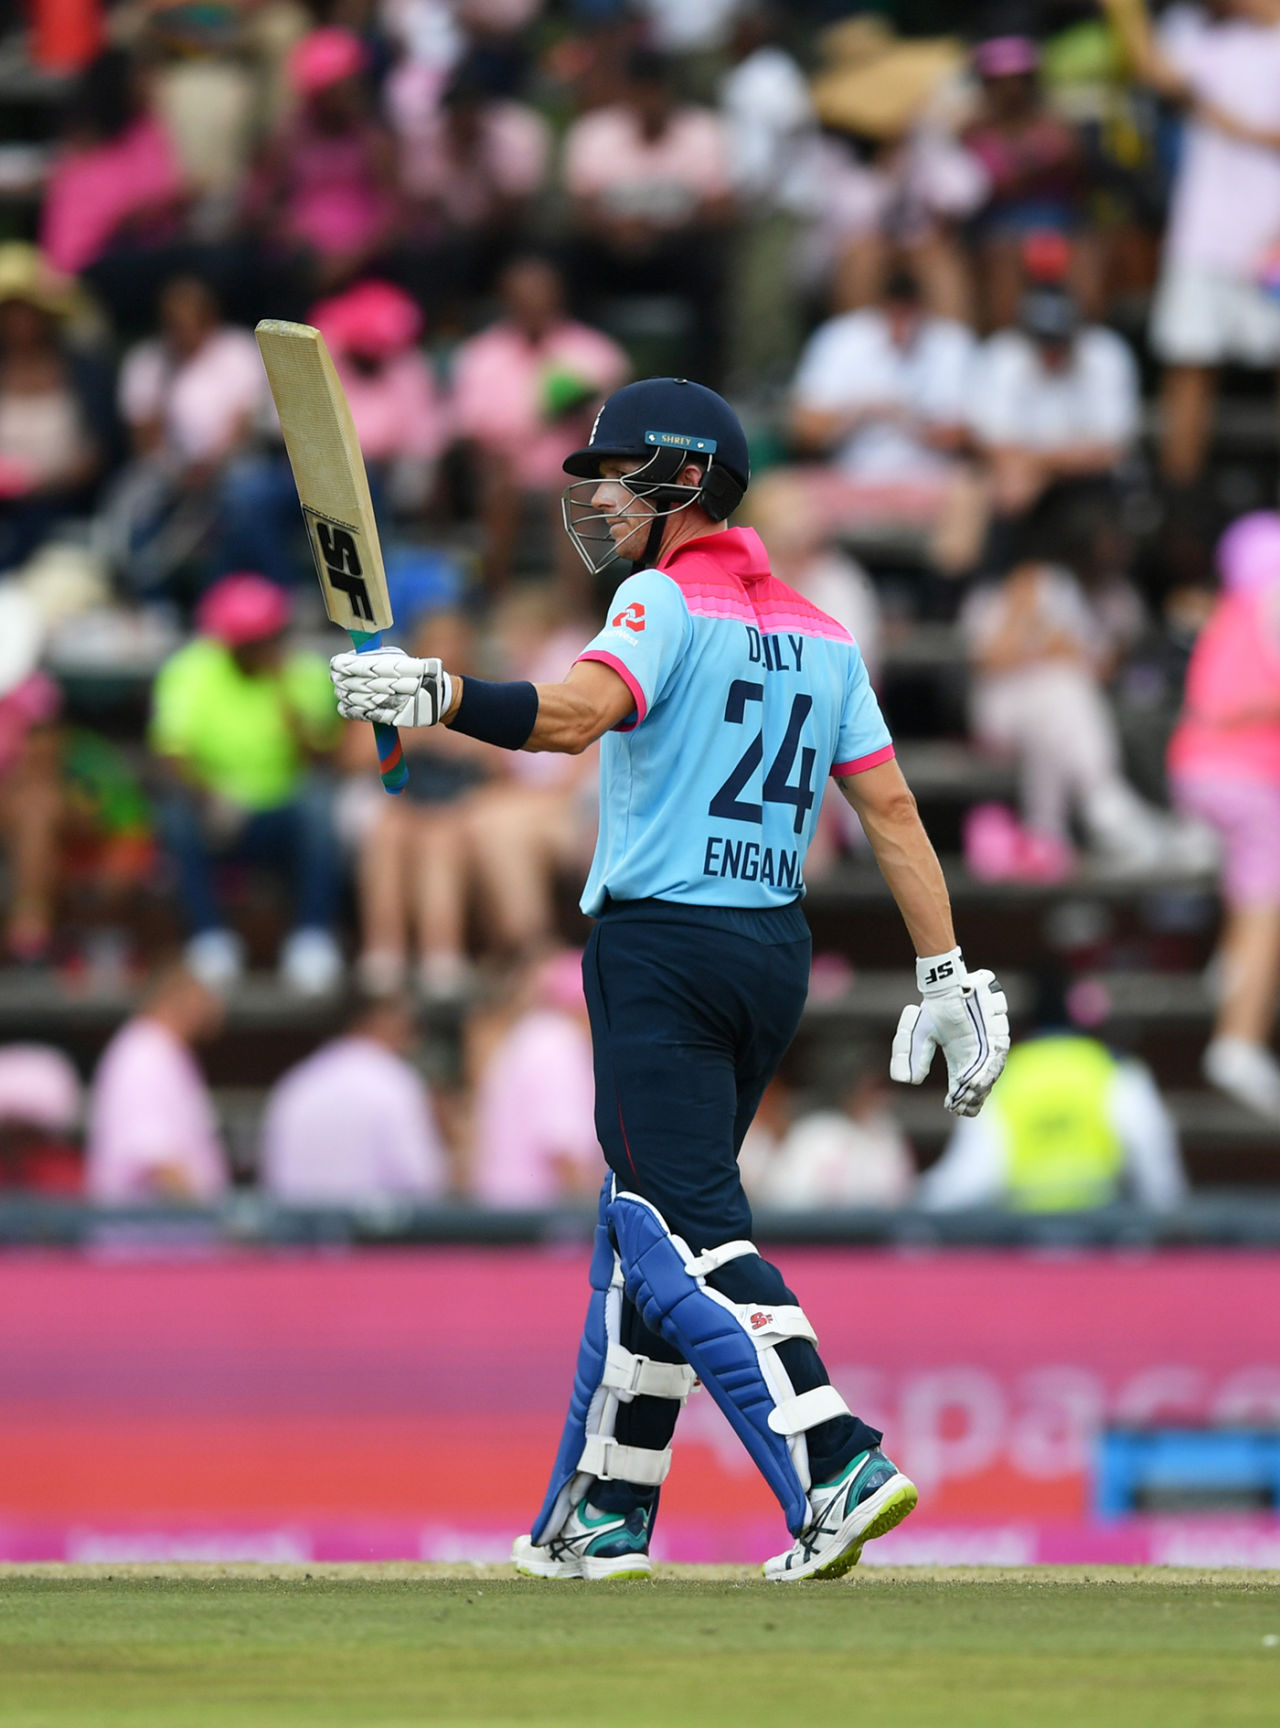 Joe Denly takes the applause for his fifty, South Africa v England, 3rd ODI, Johannesburg, February 9, 2019